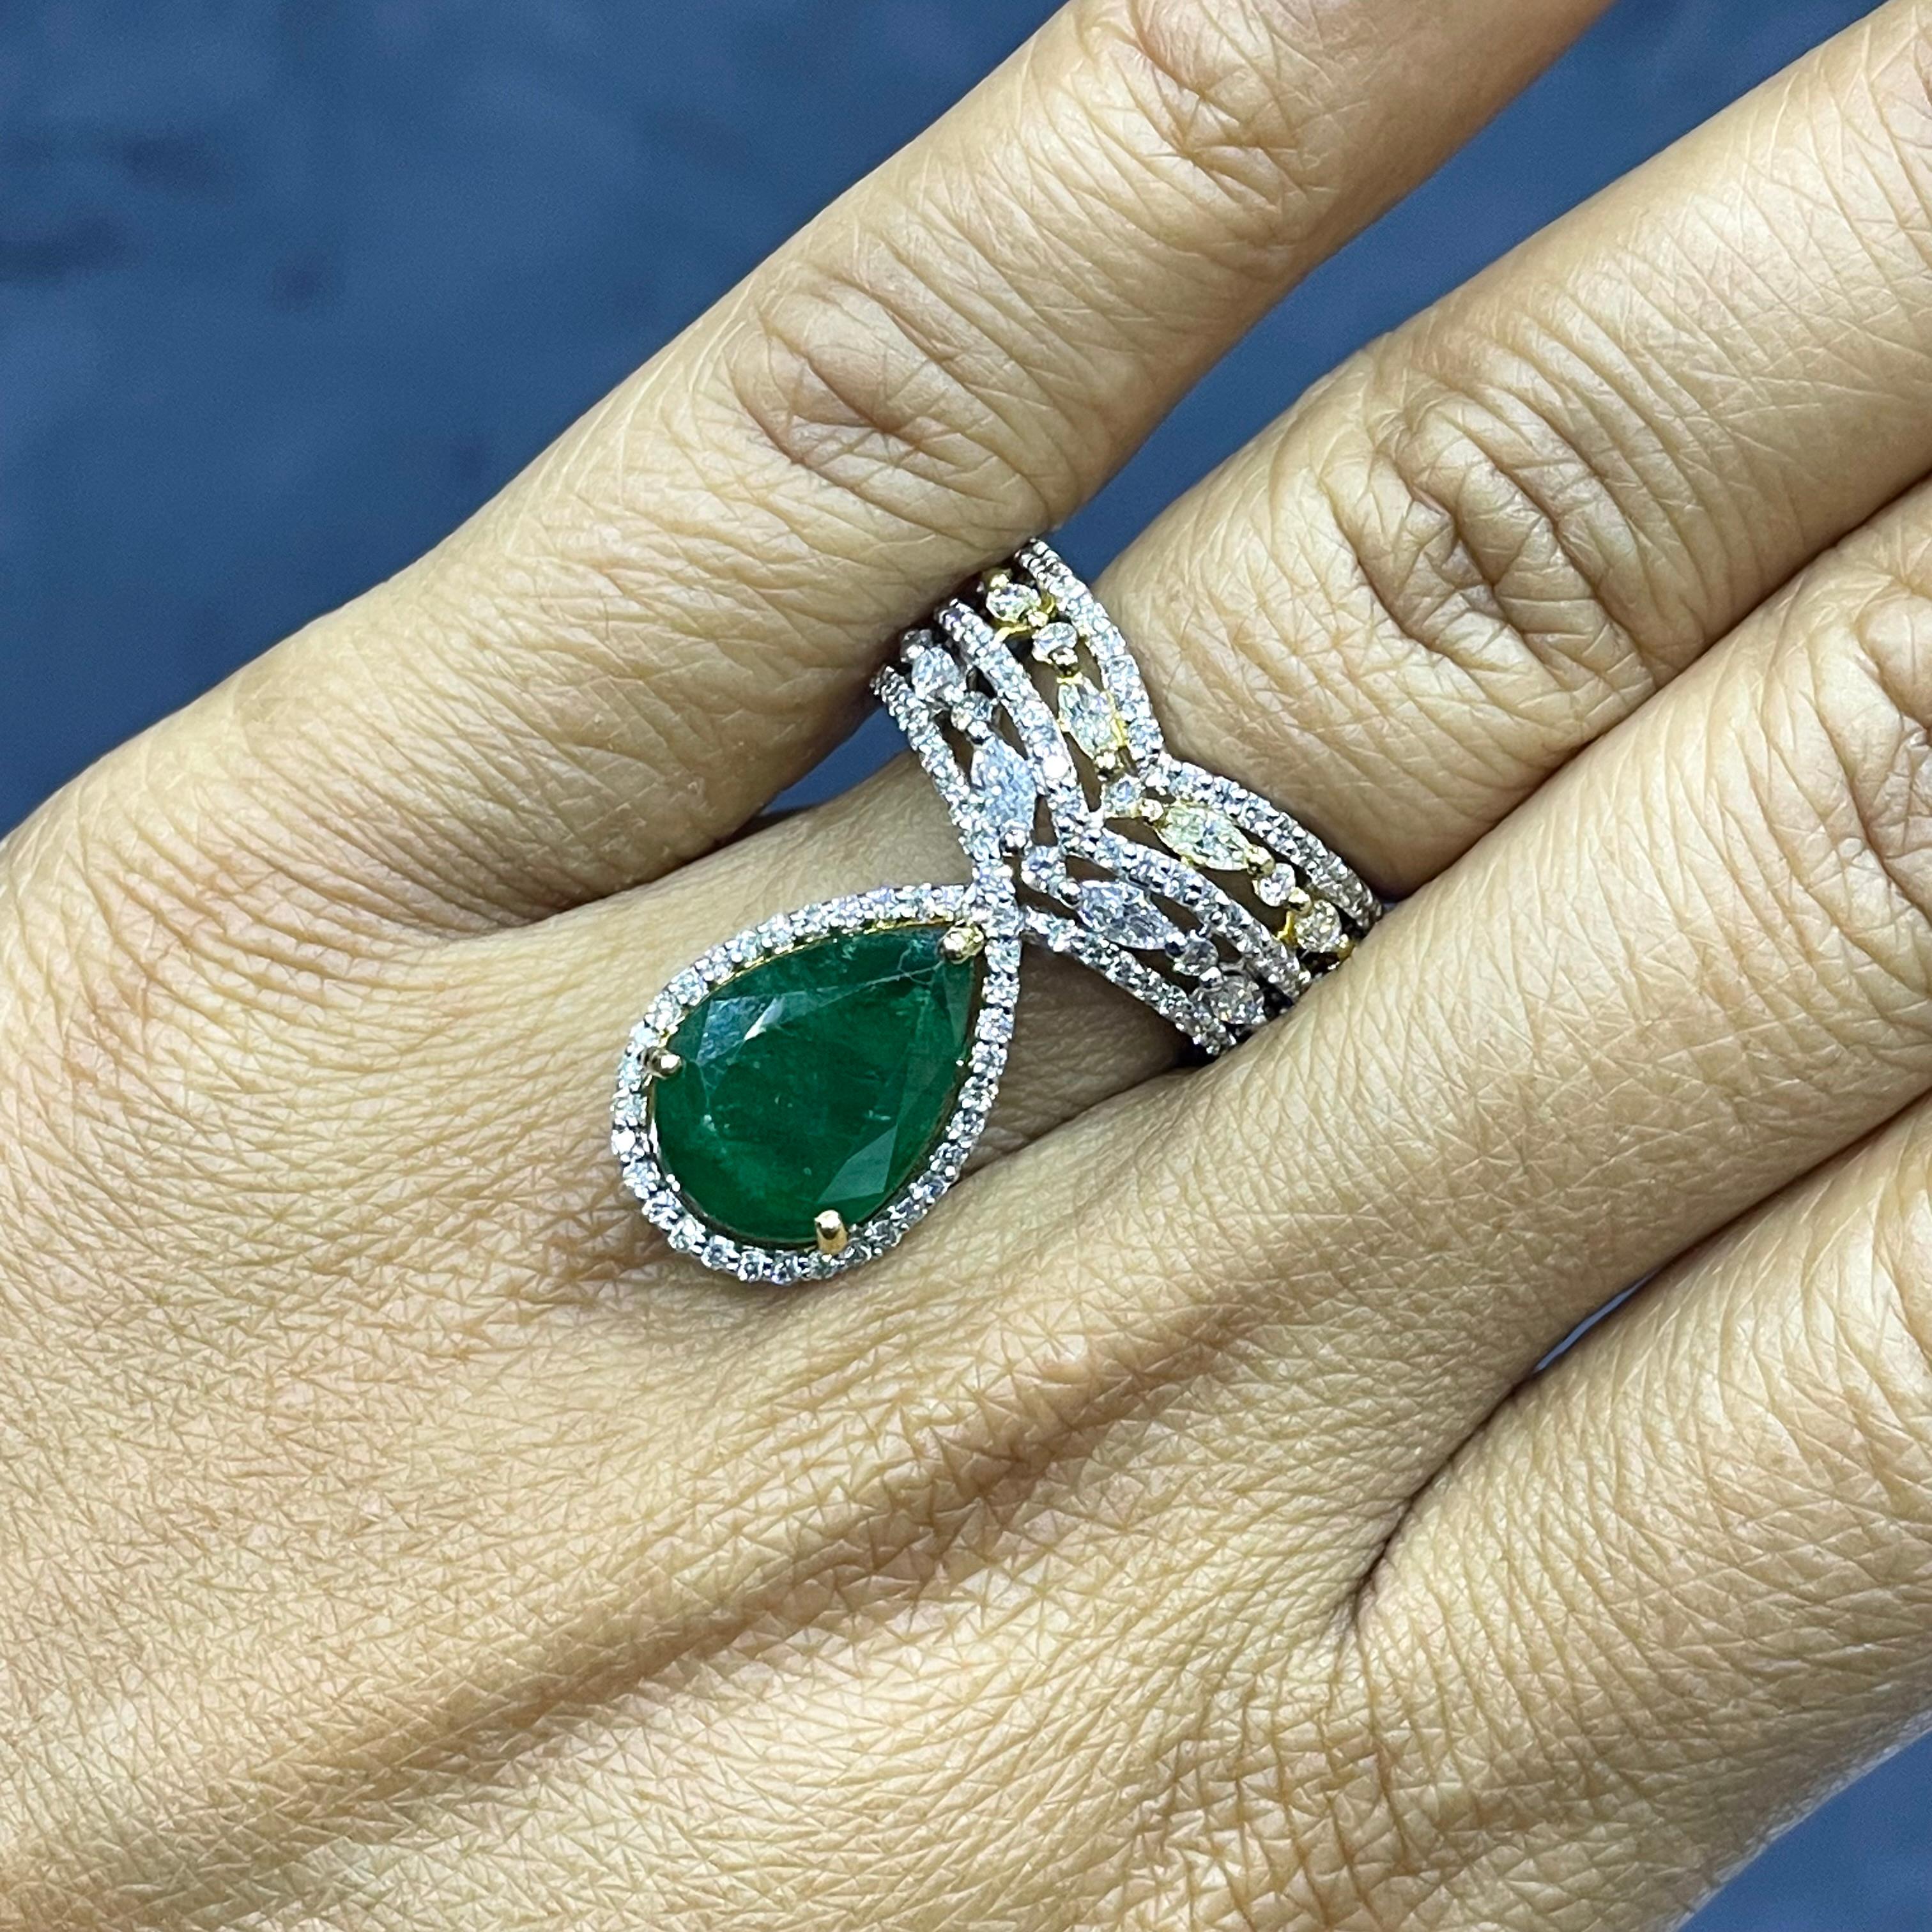 With a crown jewel structure and a mix of colors and shapes, the Danya ring is unique, sweet and attractive. 

Gemstones Type: Emerald
Gemstones Shape: Pear Shape
Gemstones Weight: 5.04 ct
Gemstones Color: Green

Diamonds Shape: Round &